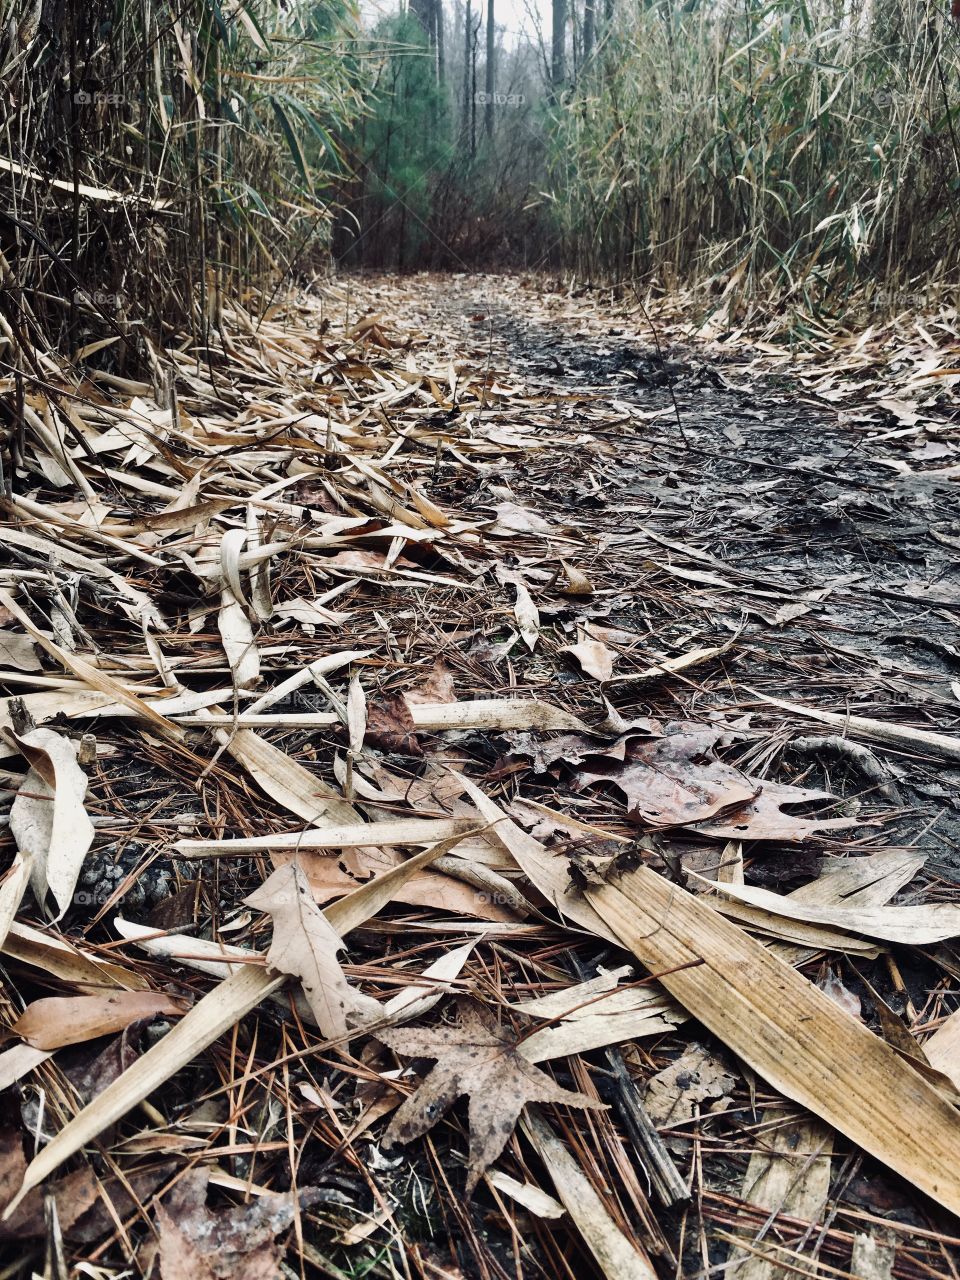 Muddy trail covered with senesced cane leaves in the forest